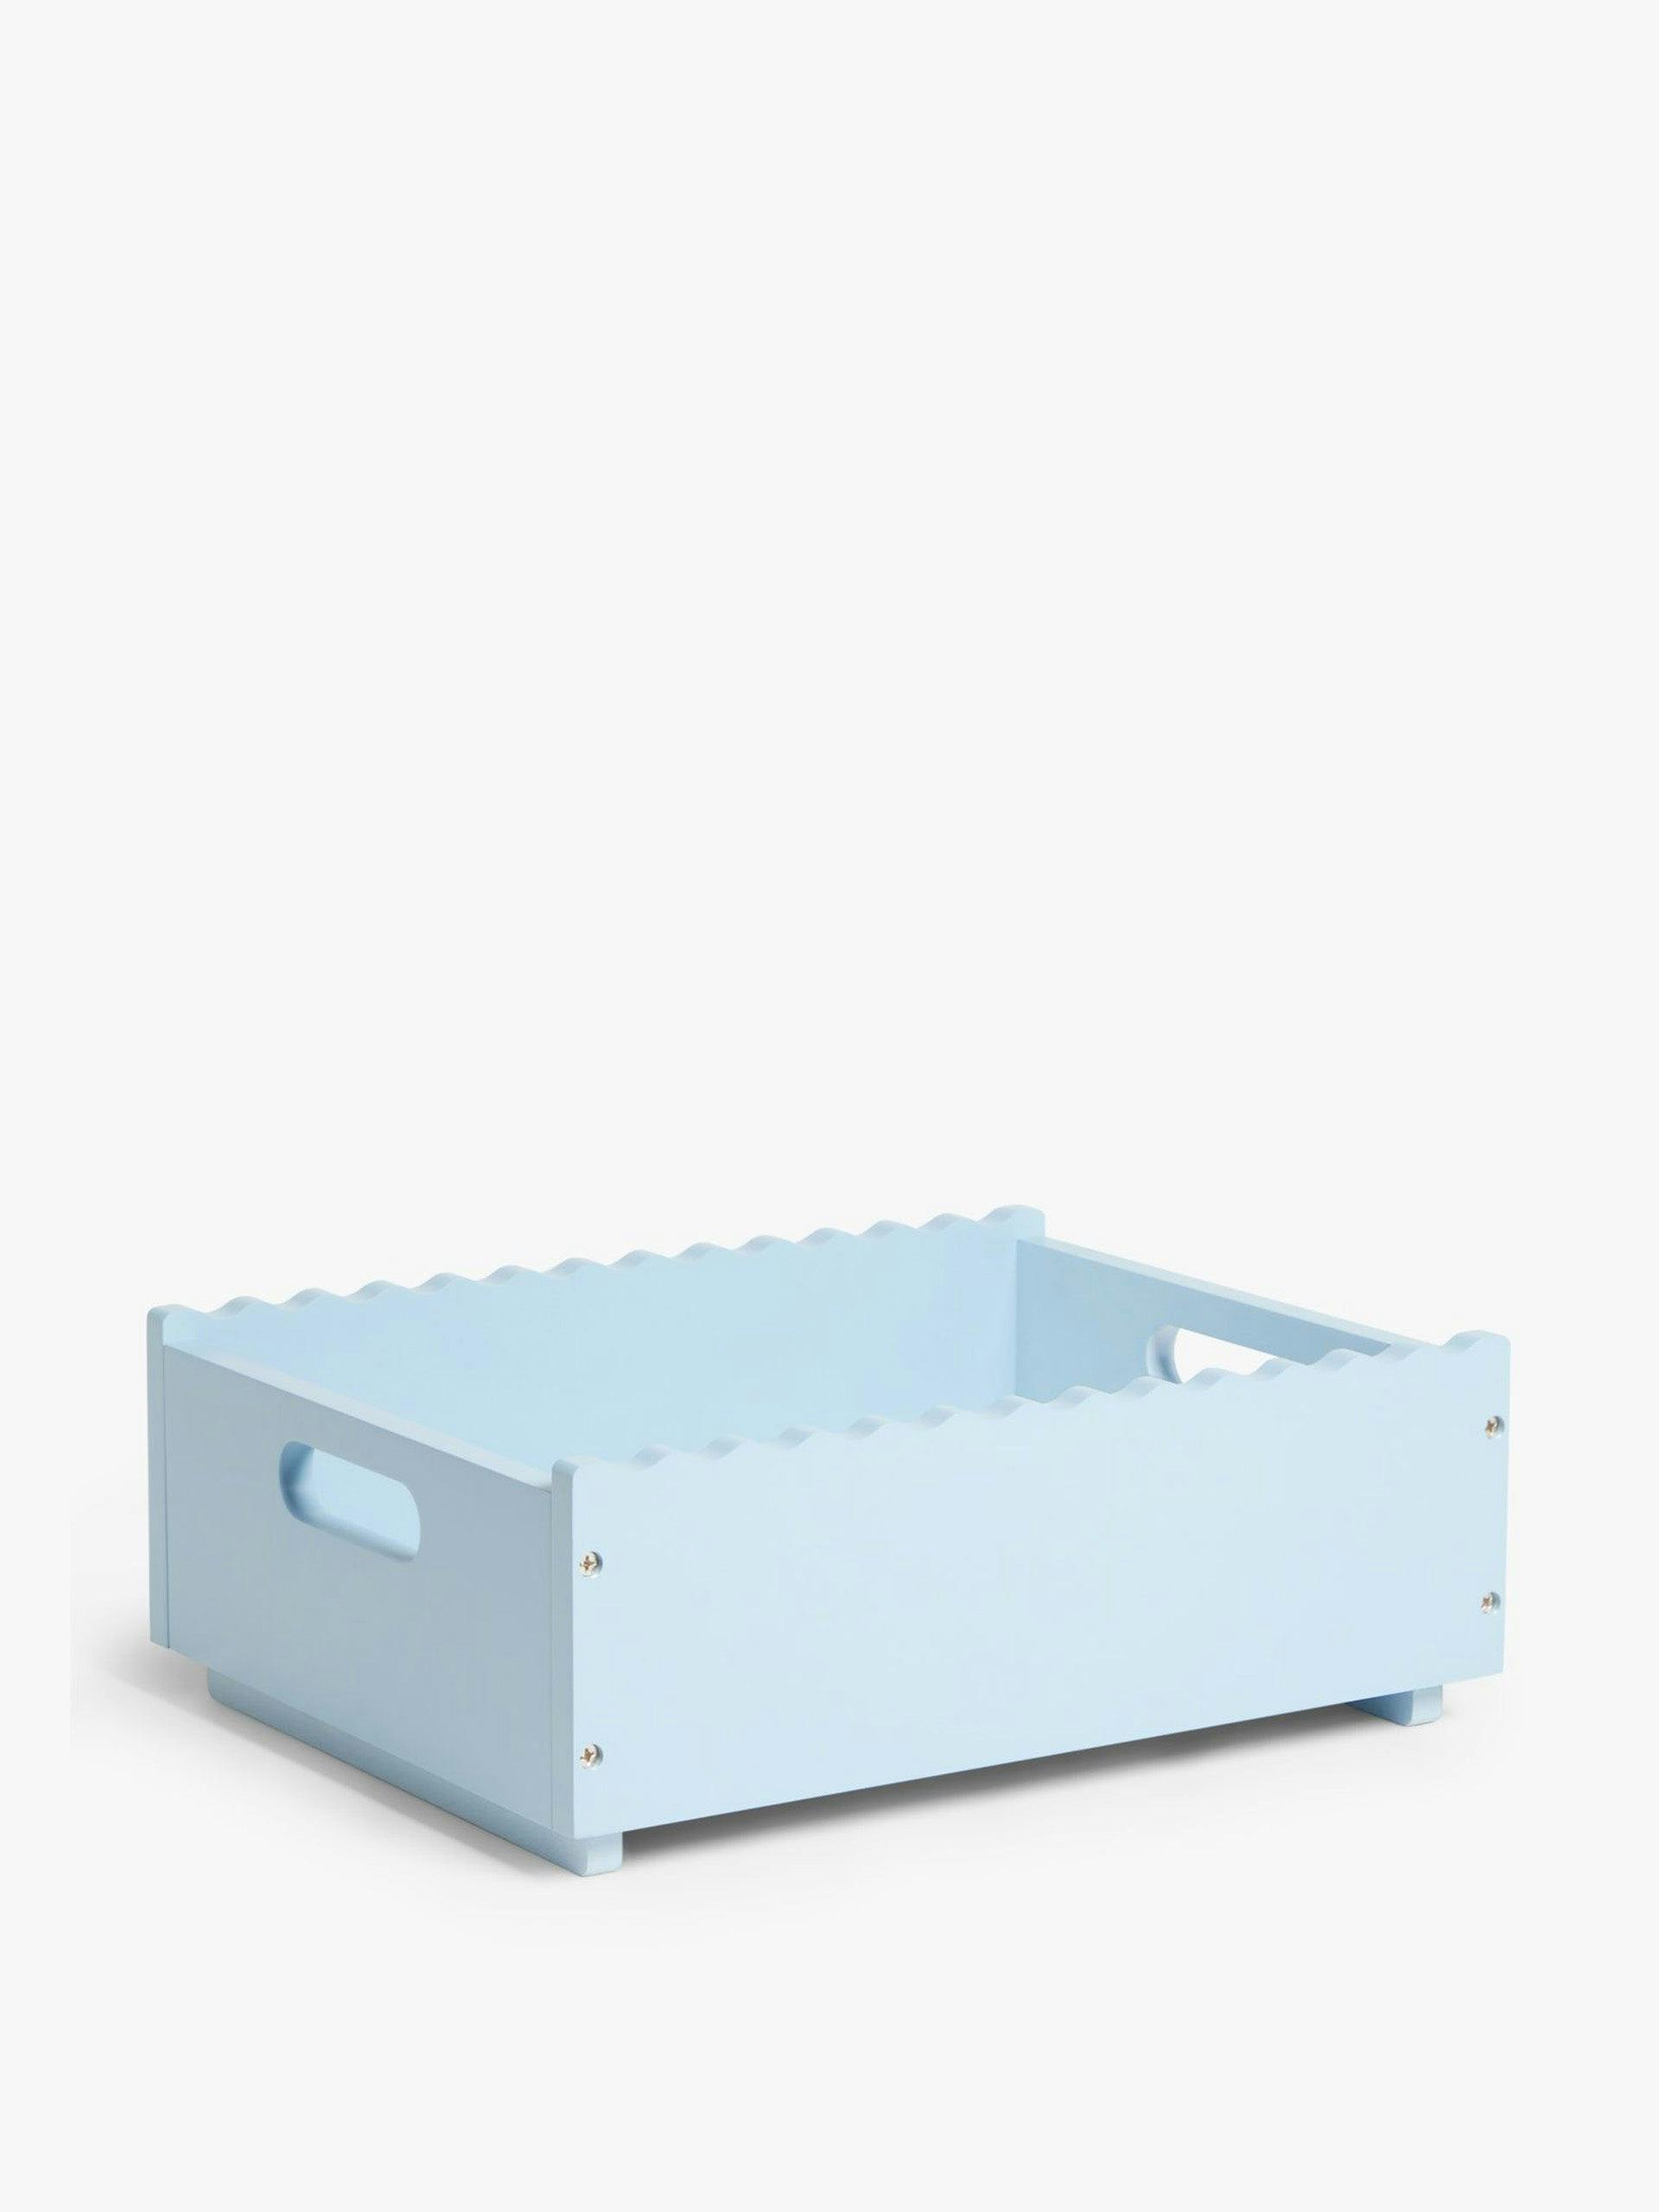 Wiggle stackable storage box